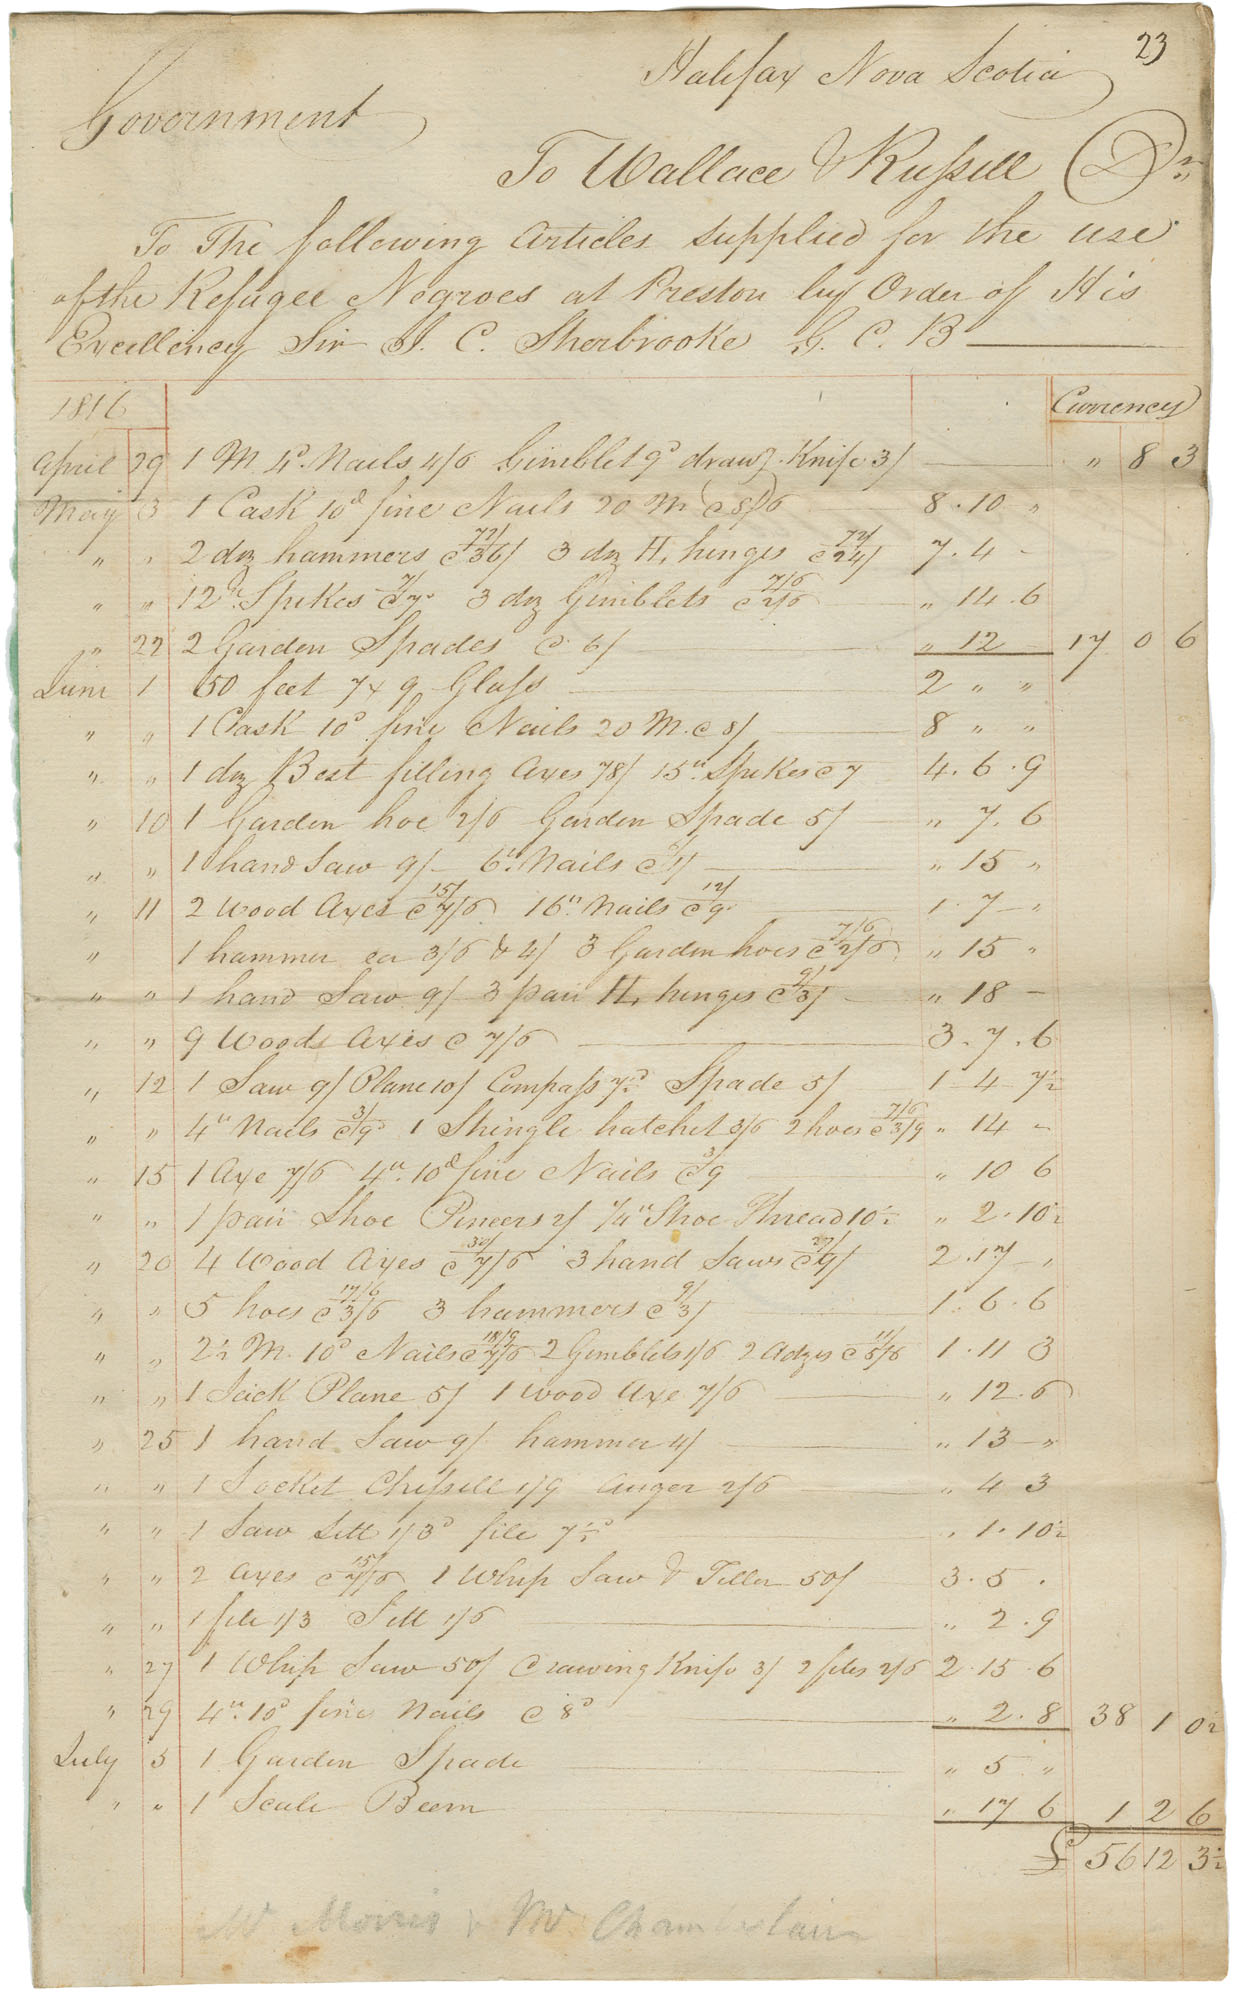 Accounts against Government for supplies for Black Refugees during the year 1816, with the following suppliers: John H. Noonan, Lewis DeMolitor, Robert Hodgers, John Skerry, Thomas N. Jeffery, Robert Leslie, Edward Randall, William Conroy, James Scott, Theophilus Chamberlain, Richard Munday, Wallace and Russell, Winkworth Allan, George Eaton, Samuel Head, Alexander Wallace, David Howe, Hartshorne, Boggs and Company, J & D Starr and Thomas Johnson